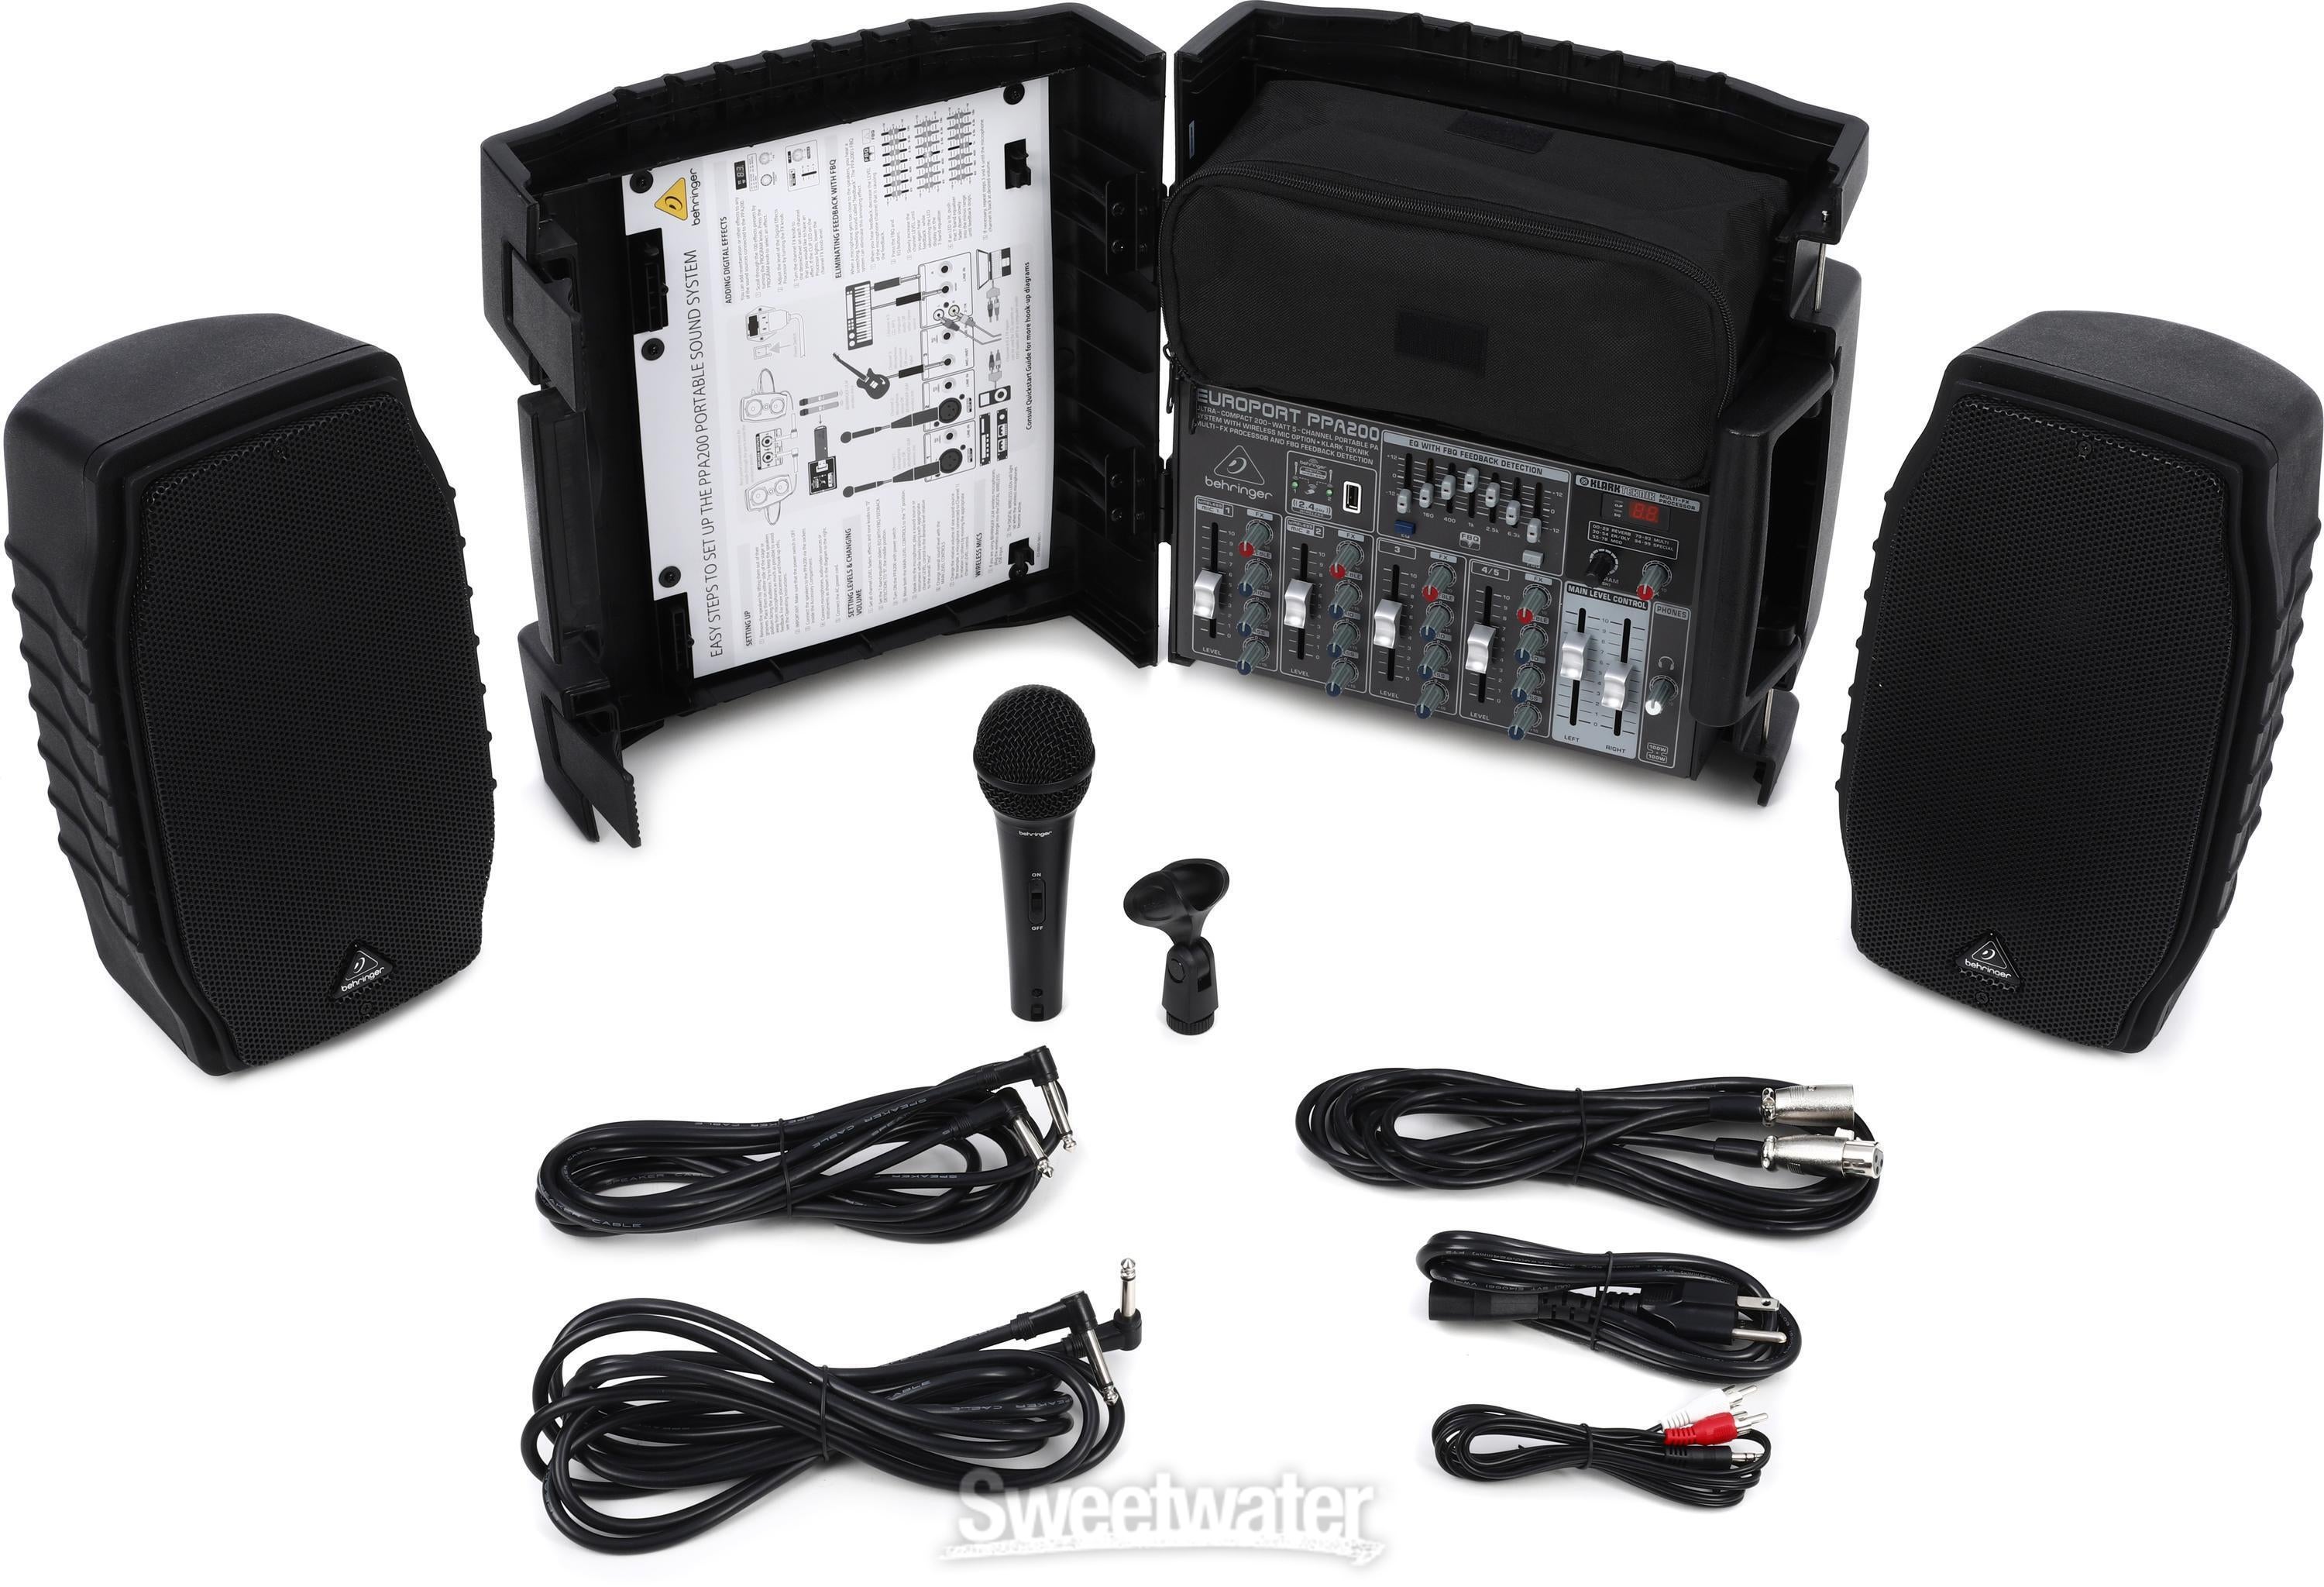 Behringer Europort PPA200 5-channel Portable PA System | Sweetwater